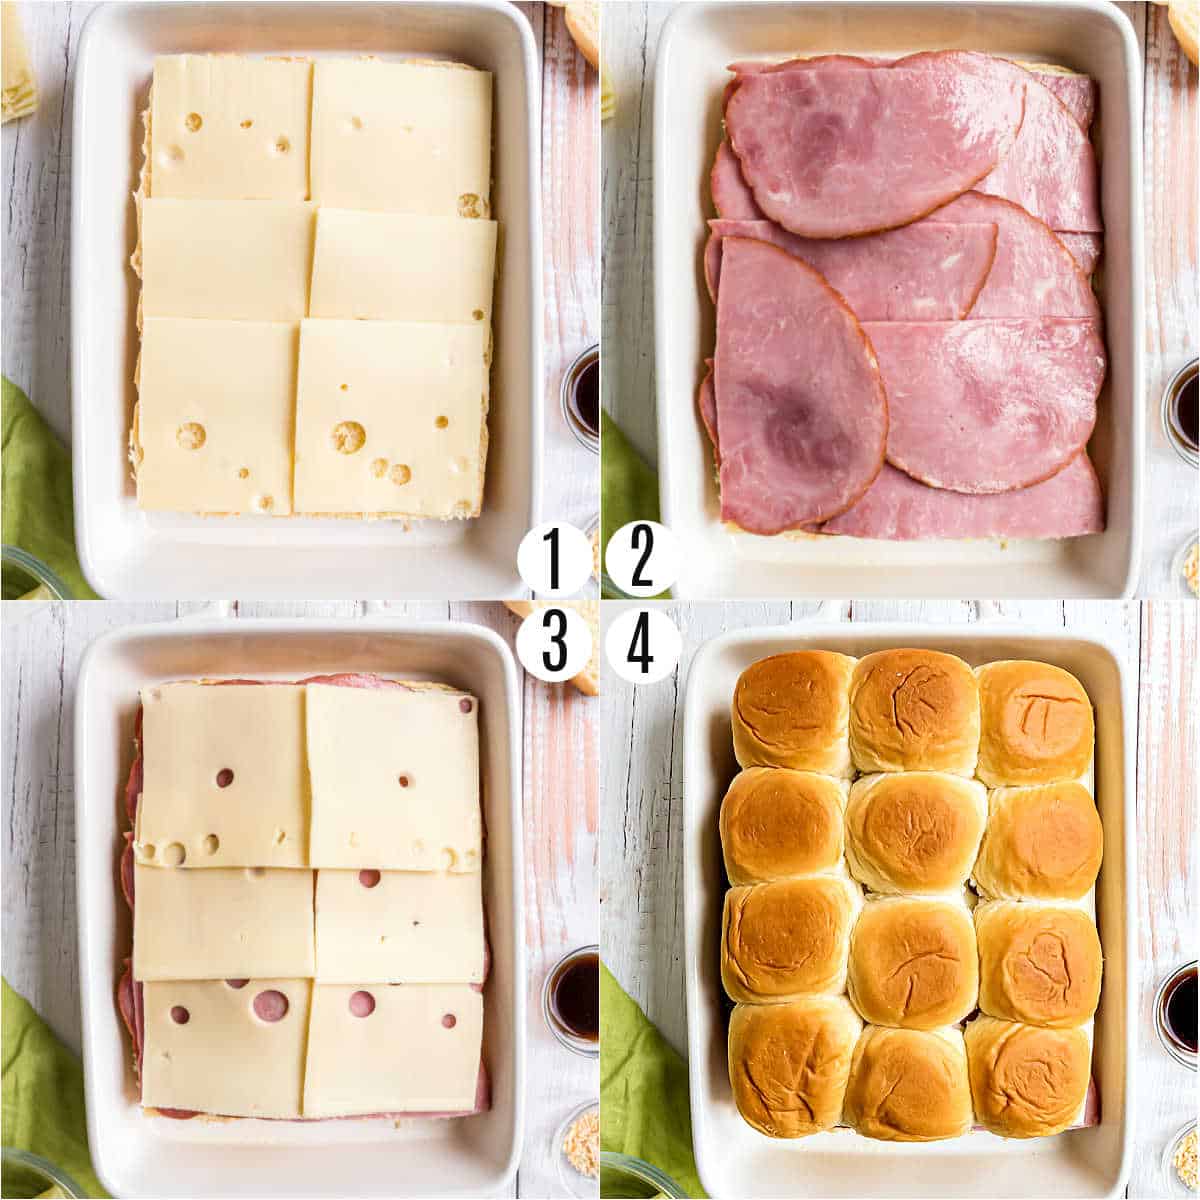 Step by step photos showing how to make ham and cheese sliders.